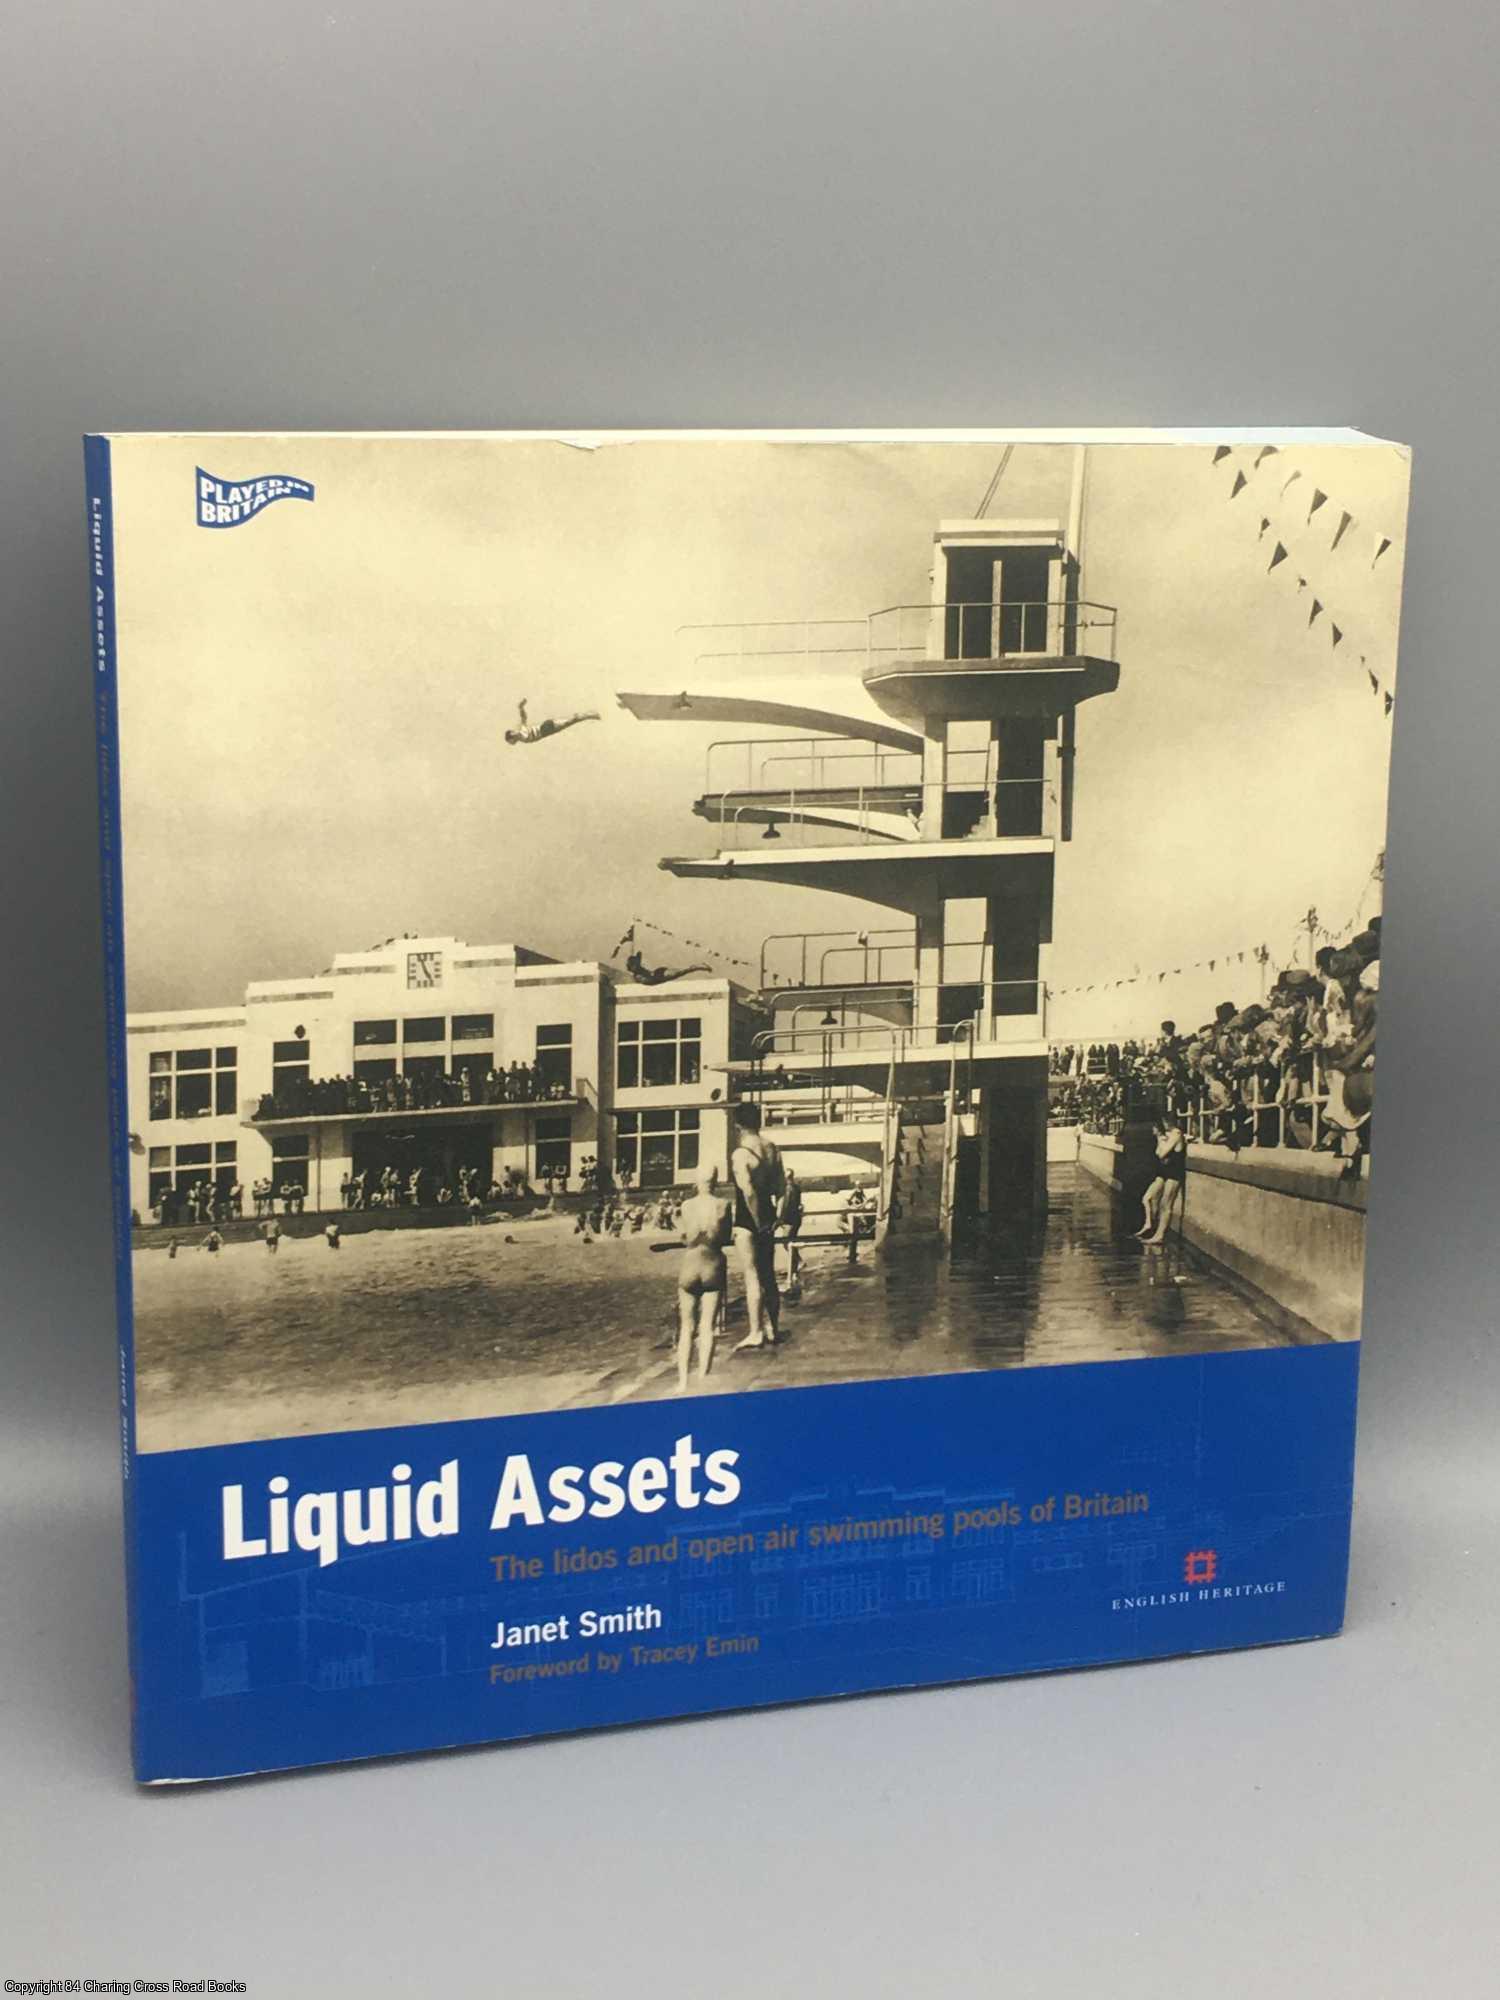 Smith, Janet - Liquid Assets: The Lidos and Open Air Swimming Pools of Britain